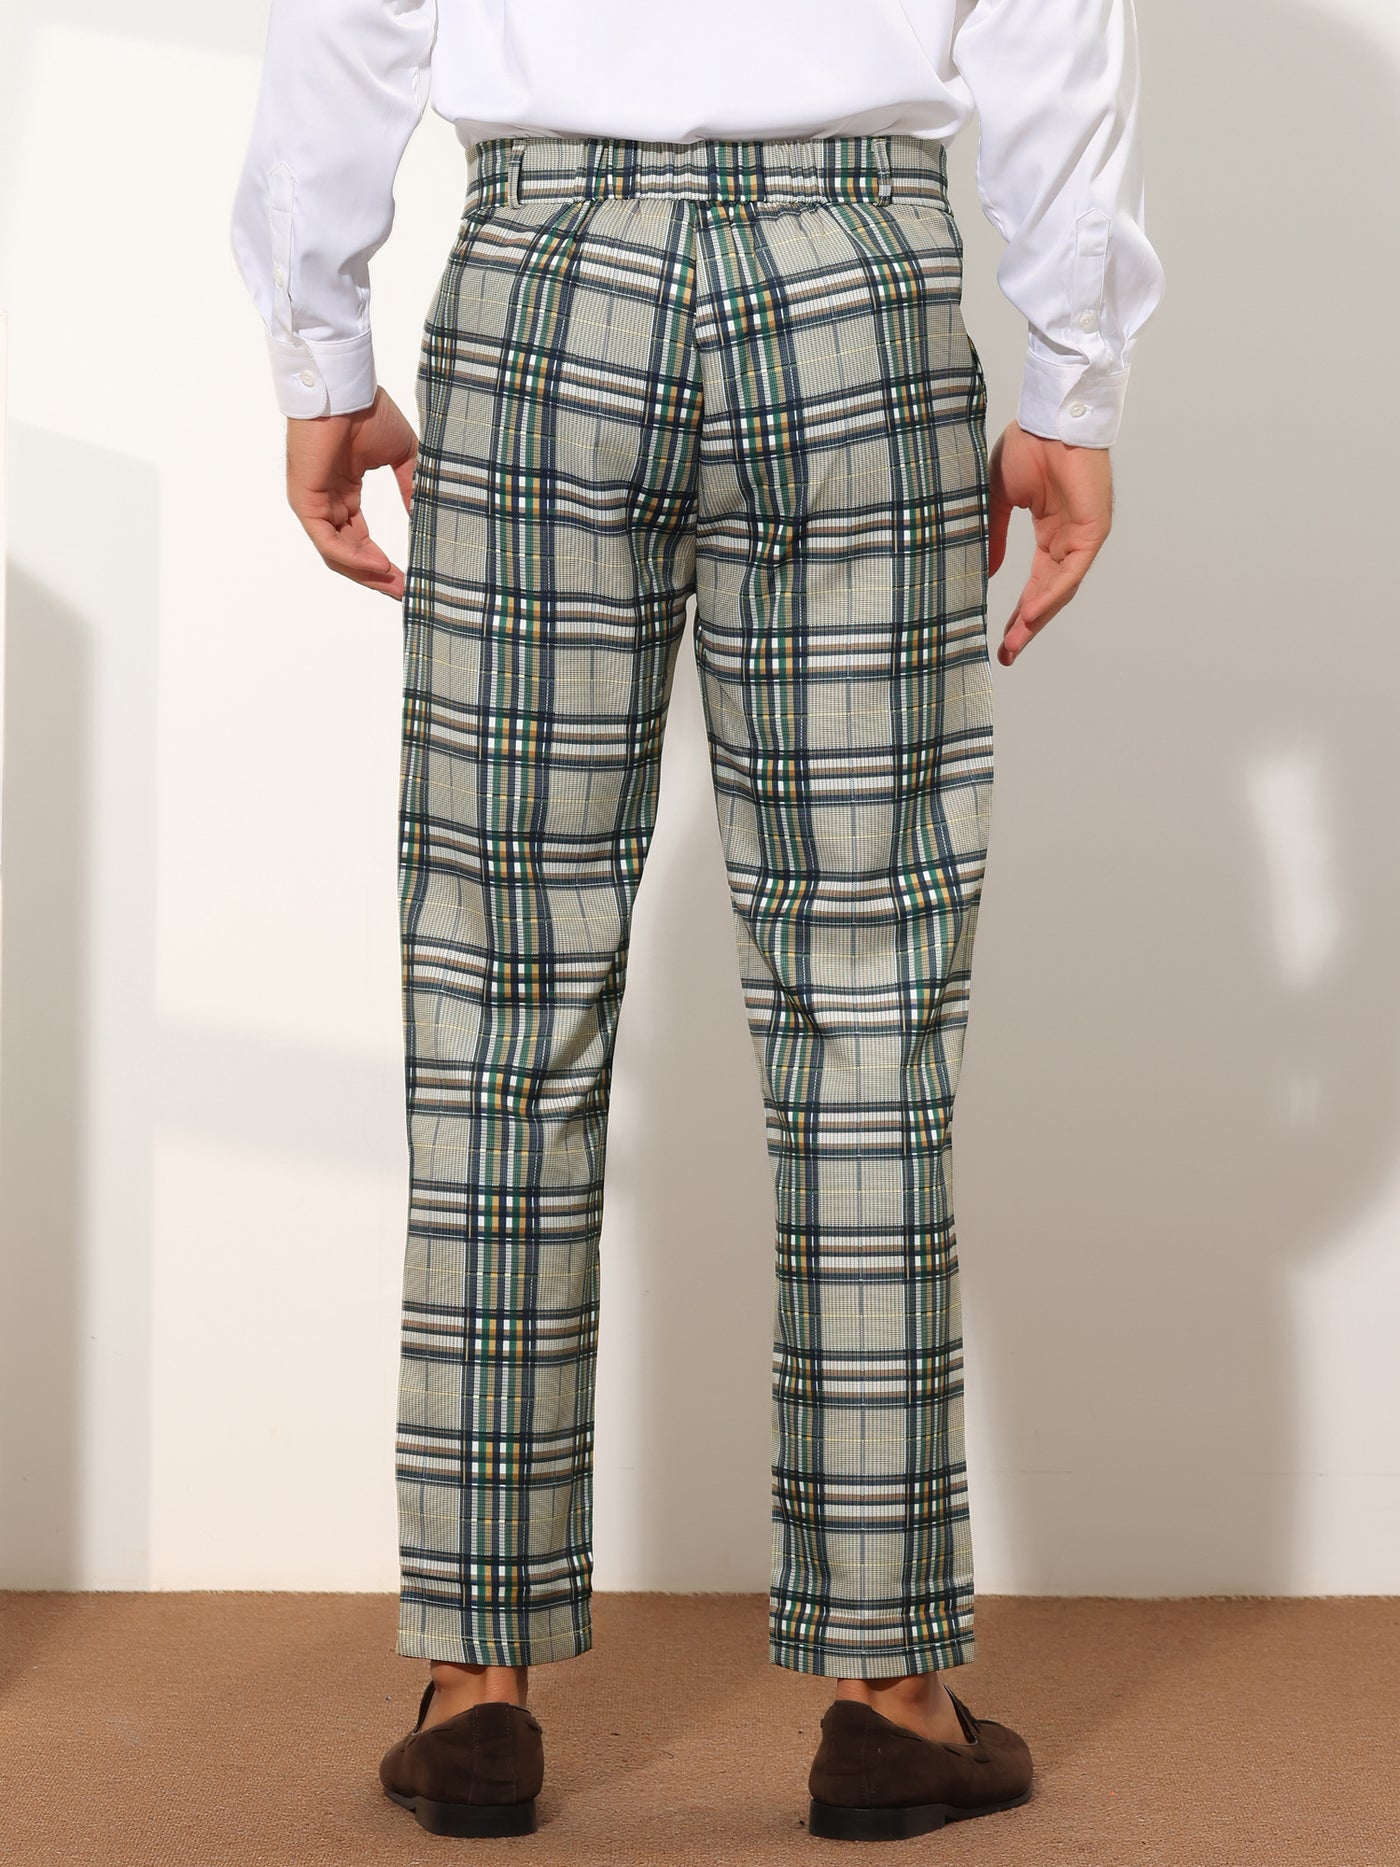 Bublédon Checked Pattern Dress Pants for Men's Flat Front Straight Fit Plaid Formal Trousers